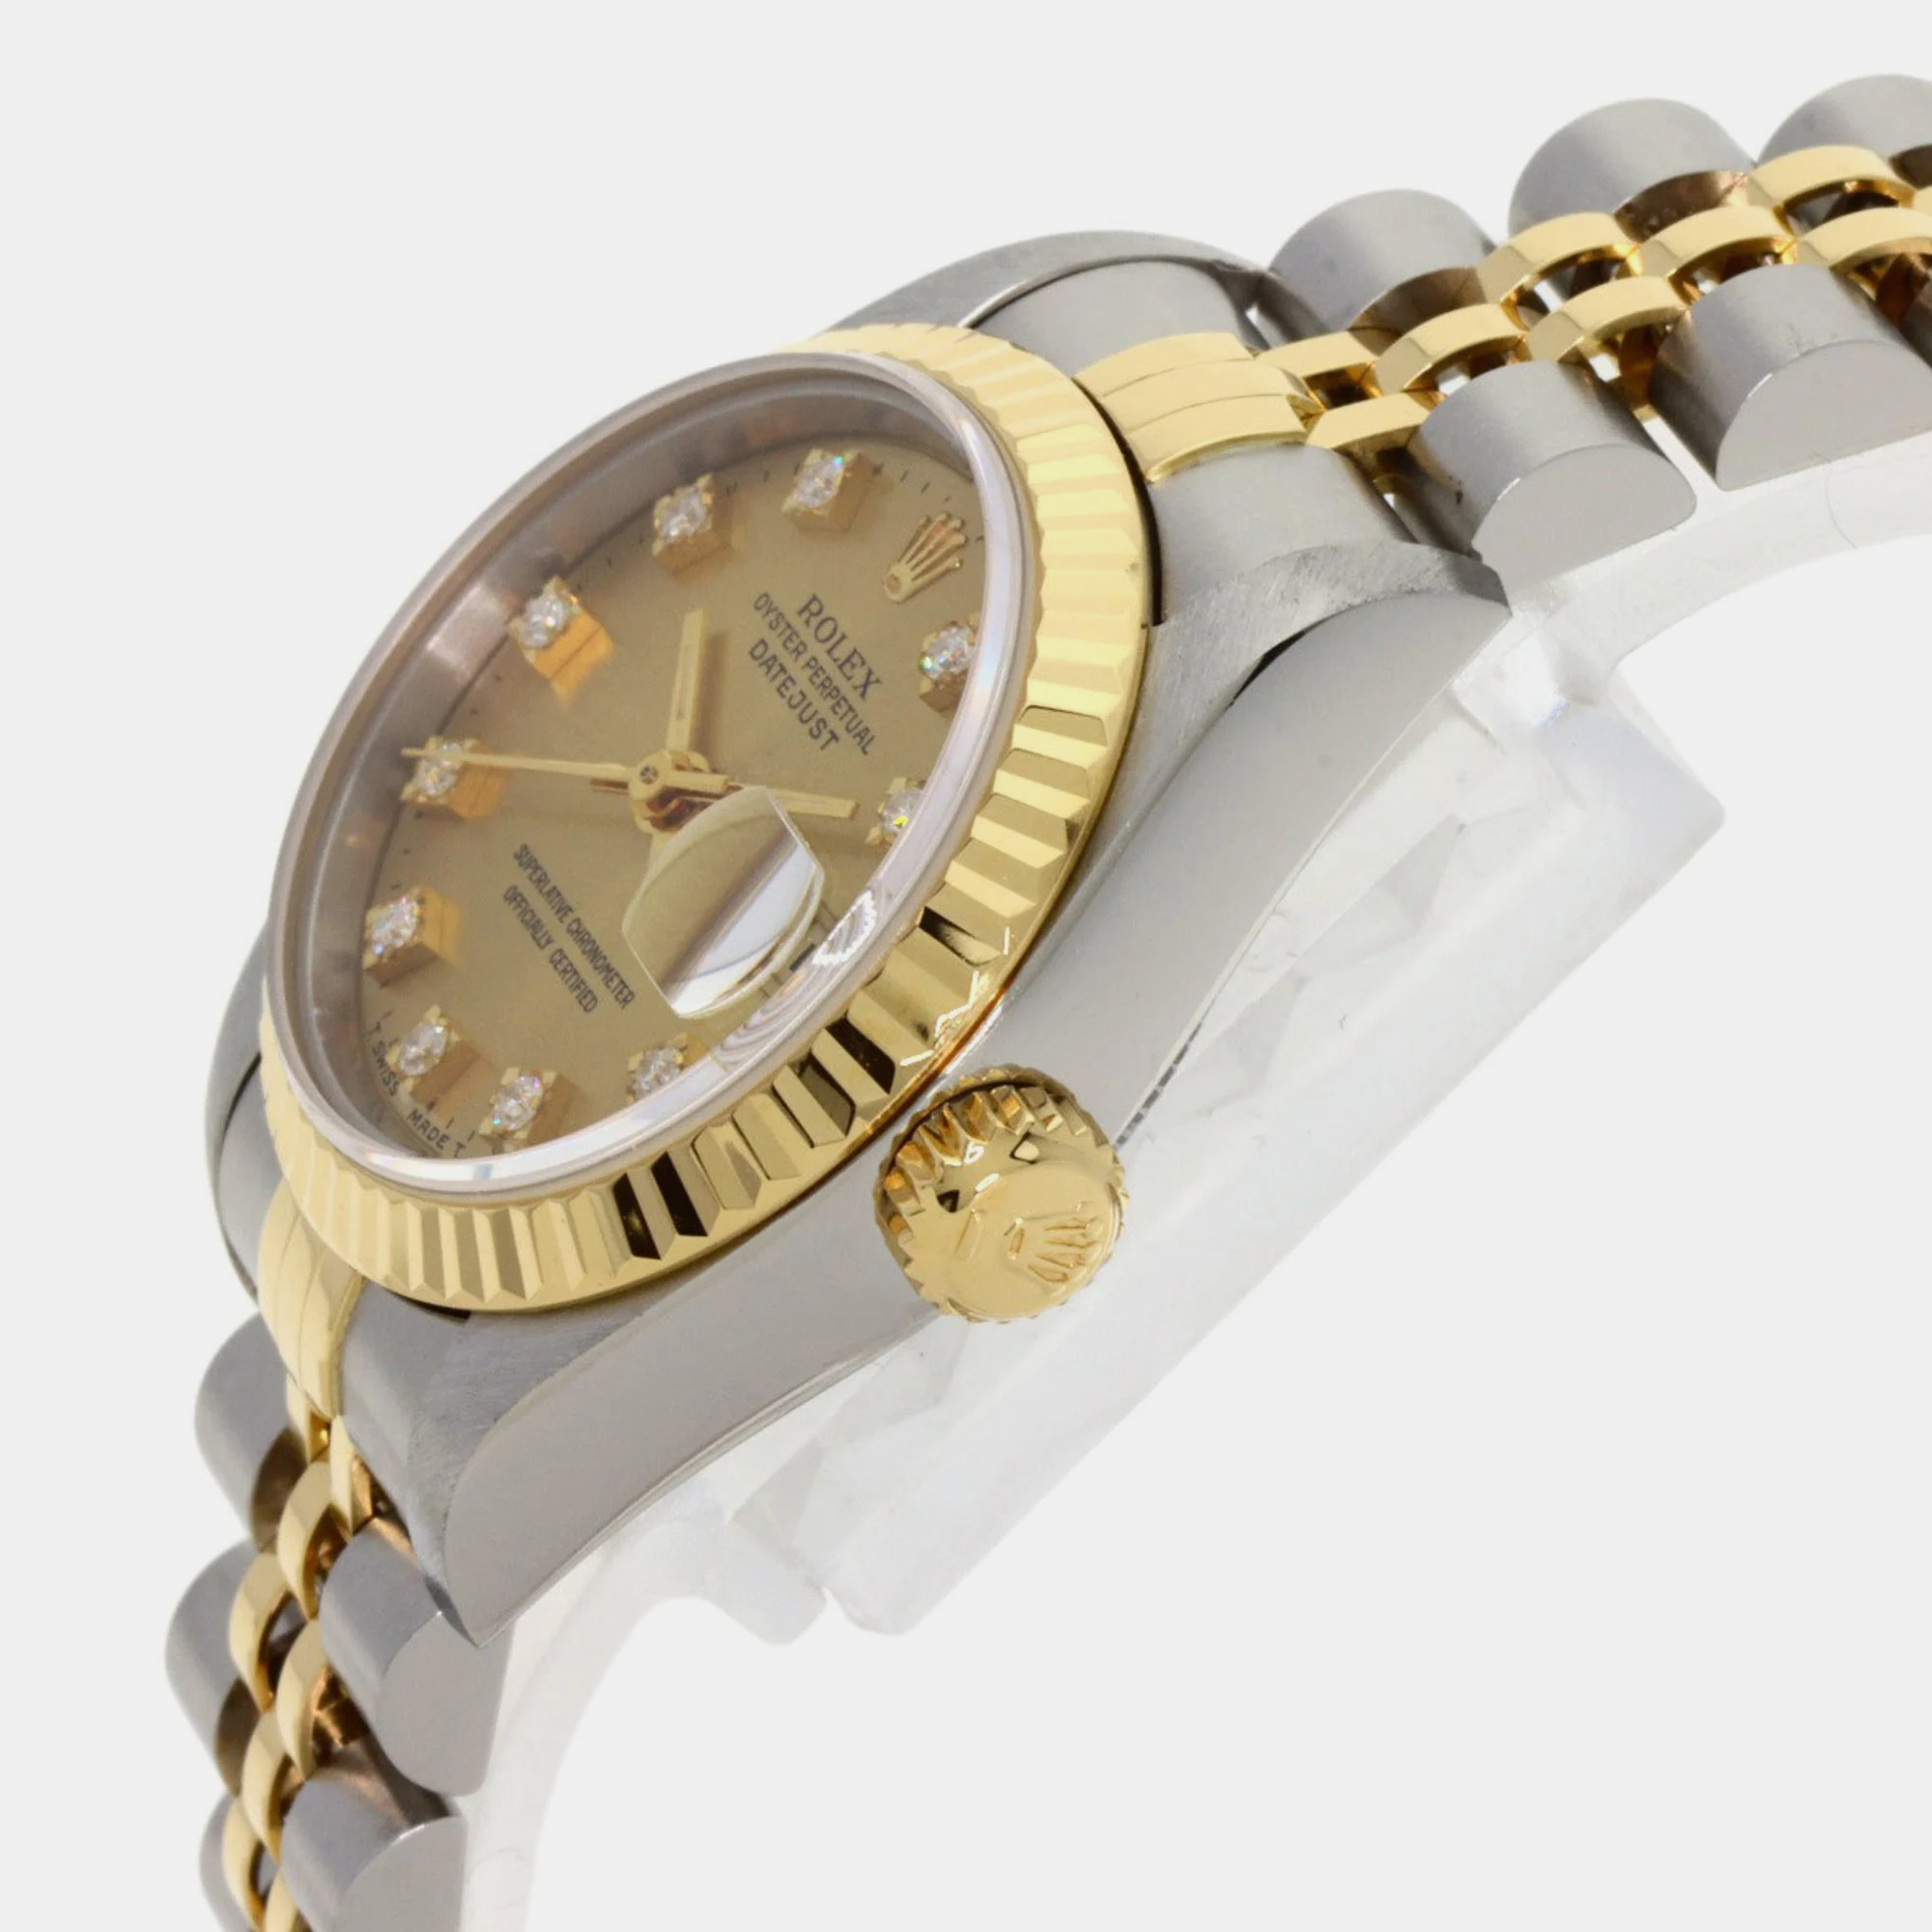 Rolex Champagne Diamond 18k Yellow Gold And Stainless Steel Datejust 69173 Automatic Women's Wristwatch 26 Mm